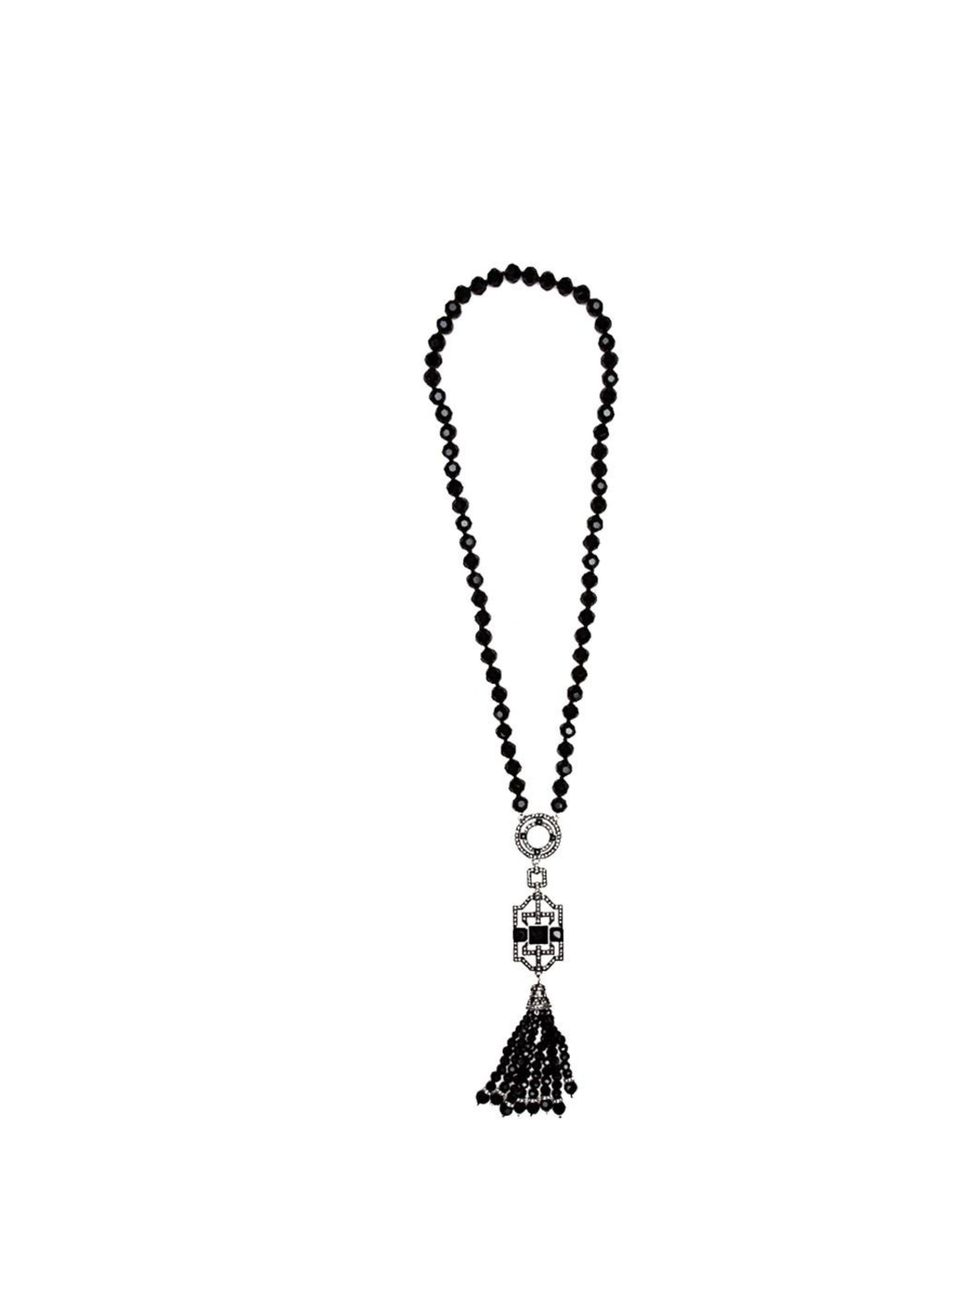 <p>Aftershock London beaded necklace, £50, <a href="http://www.aftershockplc.com/accessories/all-jewellery/necklaces.html">www.aftershockplc.com</a></p>